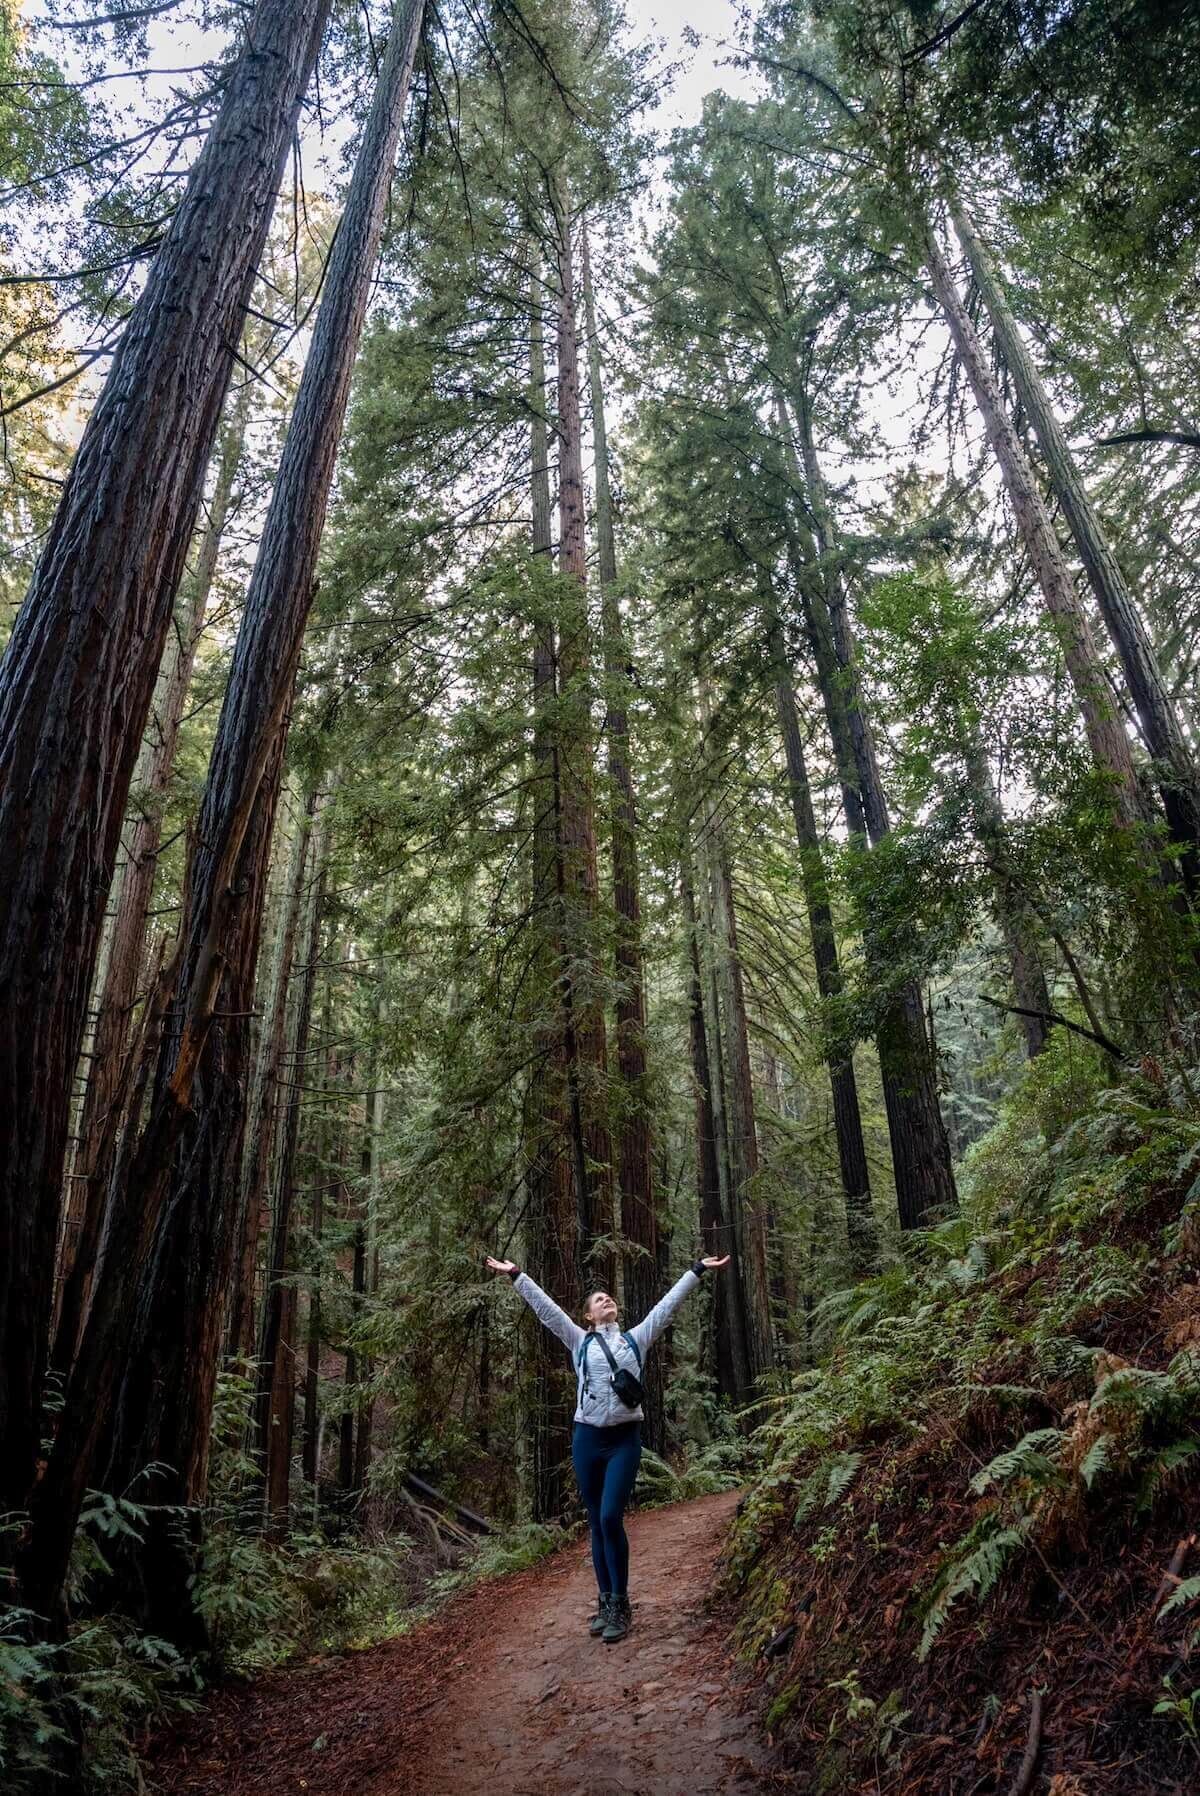 A female hiker stands facing the camera with her arms raised above her head on a path amidst a dense grove of tall, thin, redwoods in Reinhardt Redwood Regional Park.